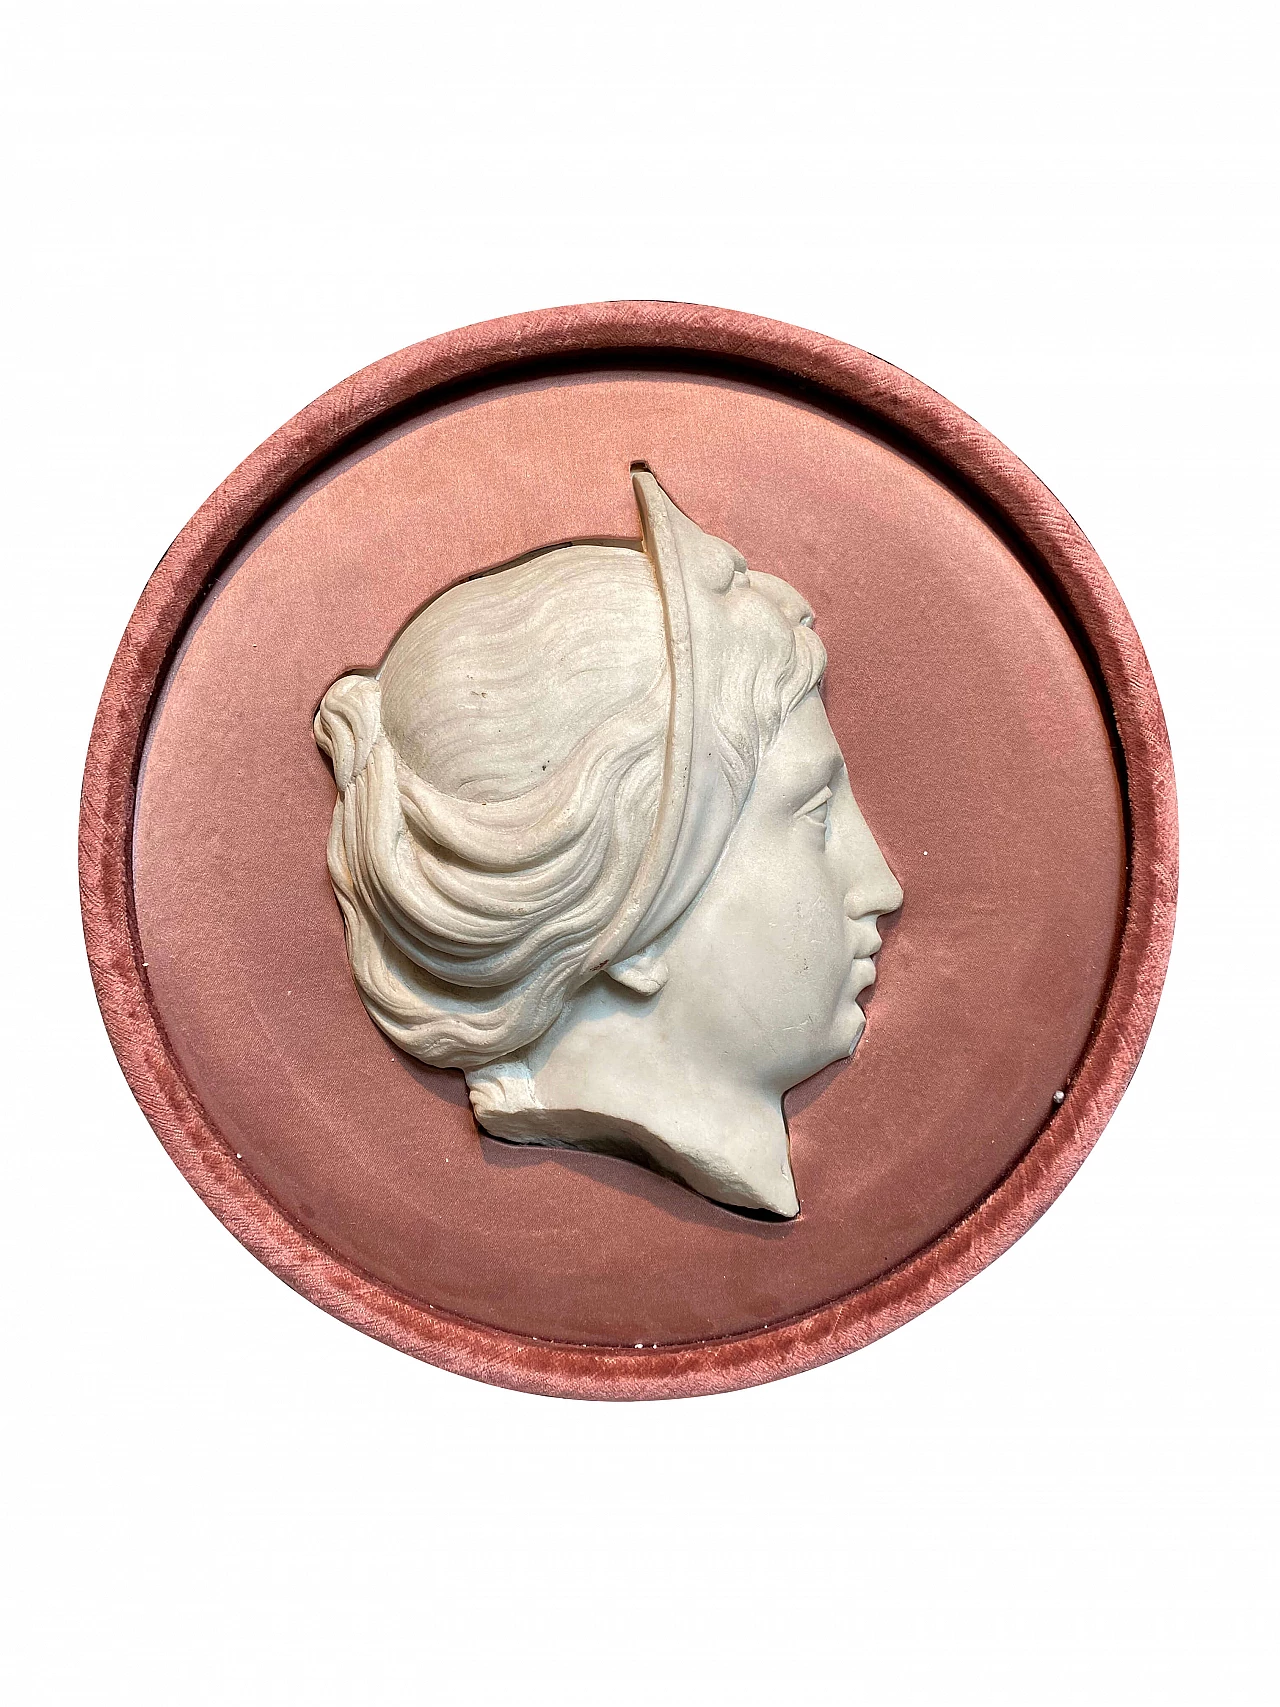 Tondo with marble profile of a lady on pink velvet 1249461